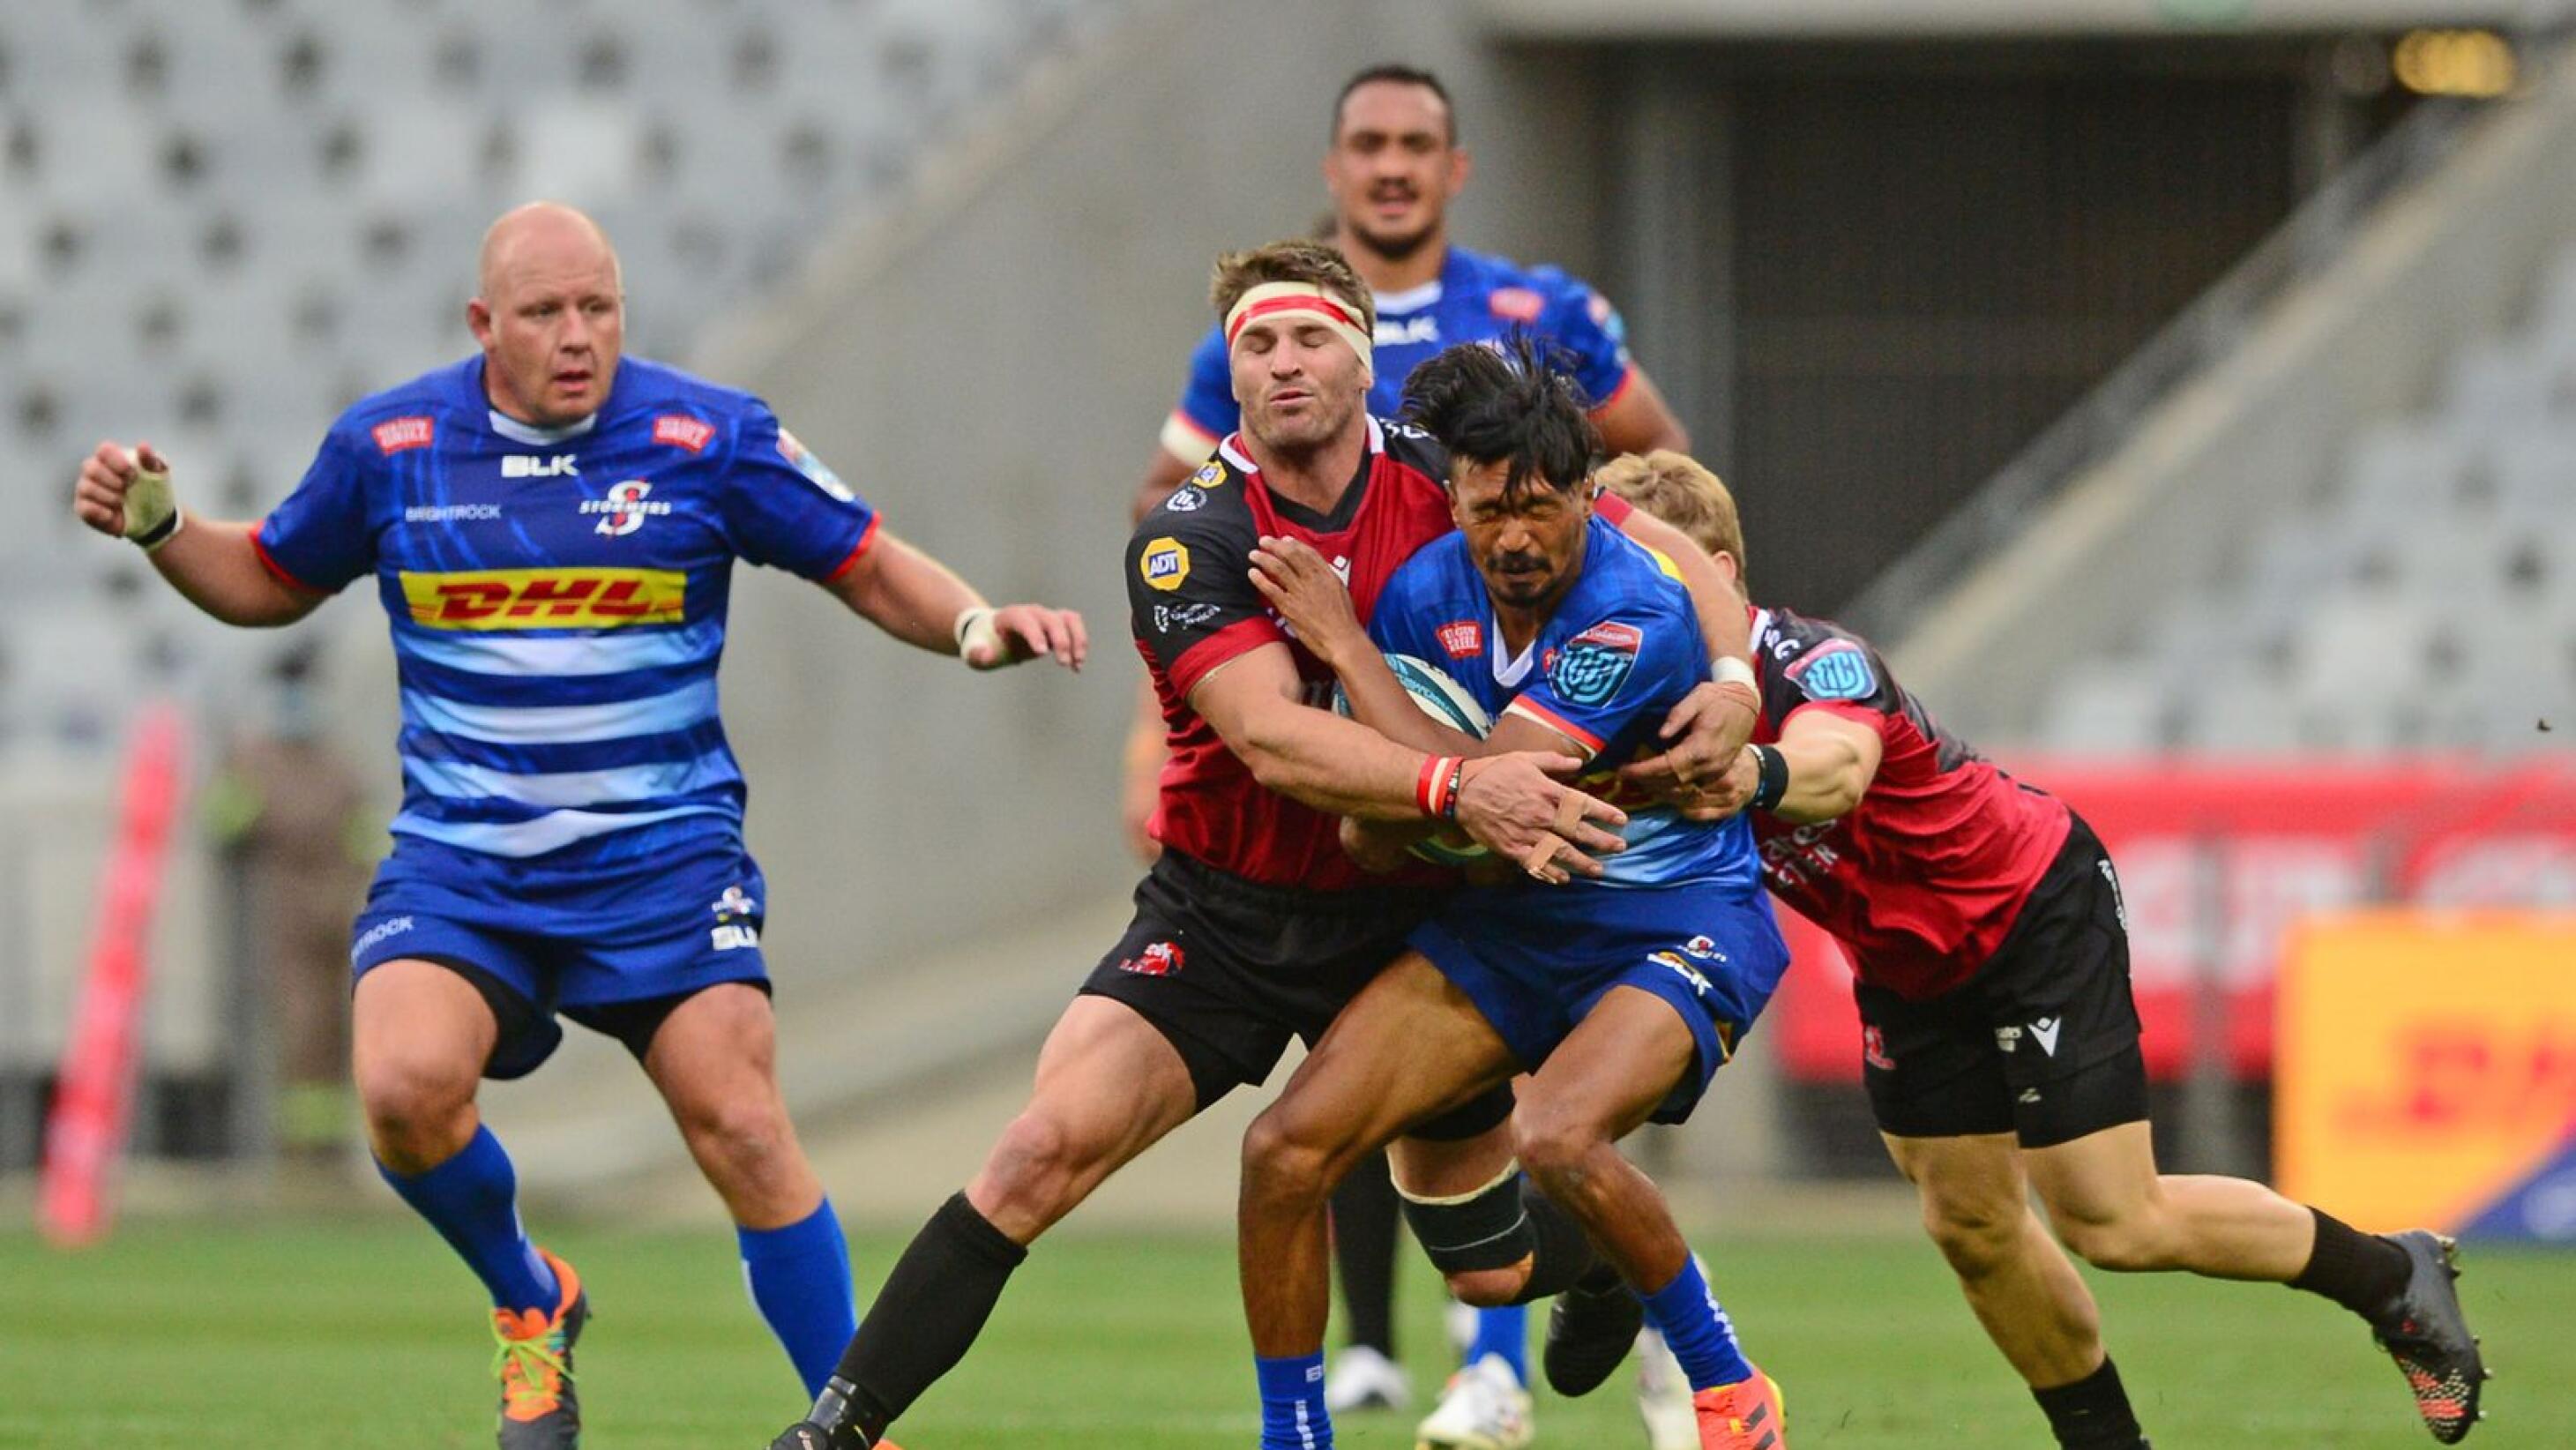 Tristan Leyds of the Stormers is tackled by Jaco Kriel and Morne van der Berg of the Lions during their United Rugby Championship game at Cape Town Stadium in Cape Town on Saturday